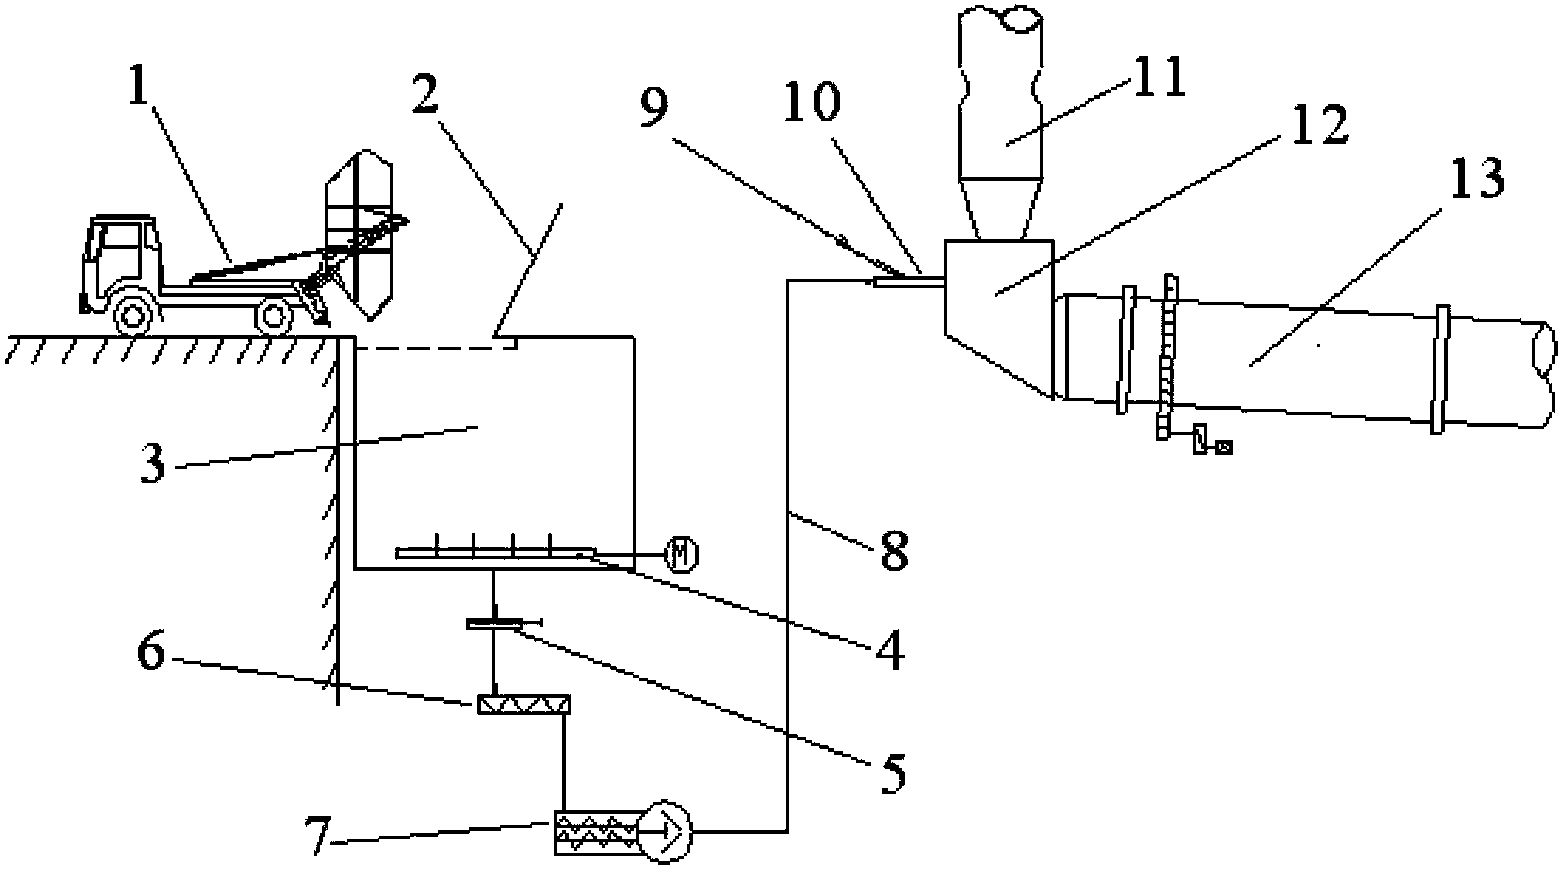 Chemical engineering sludge processing system